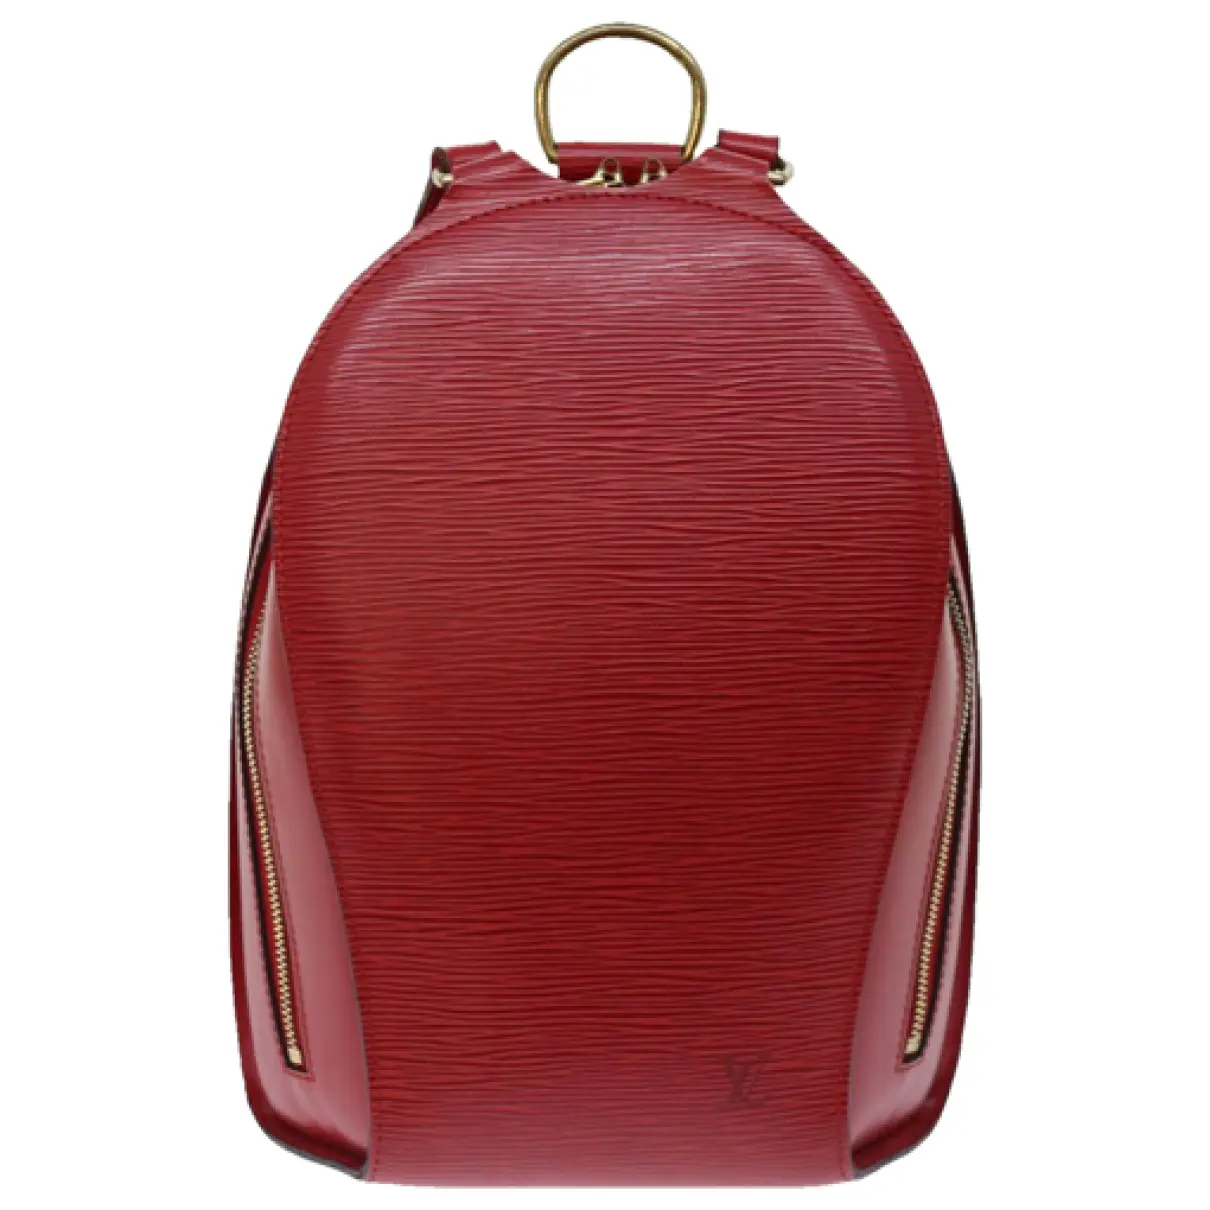 Mabillon leather backpack